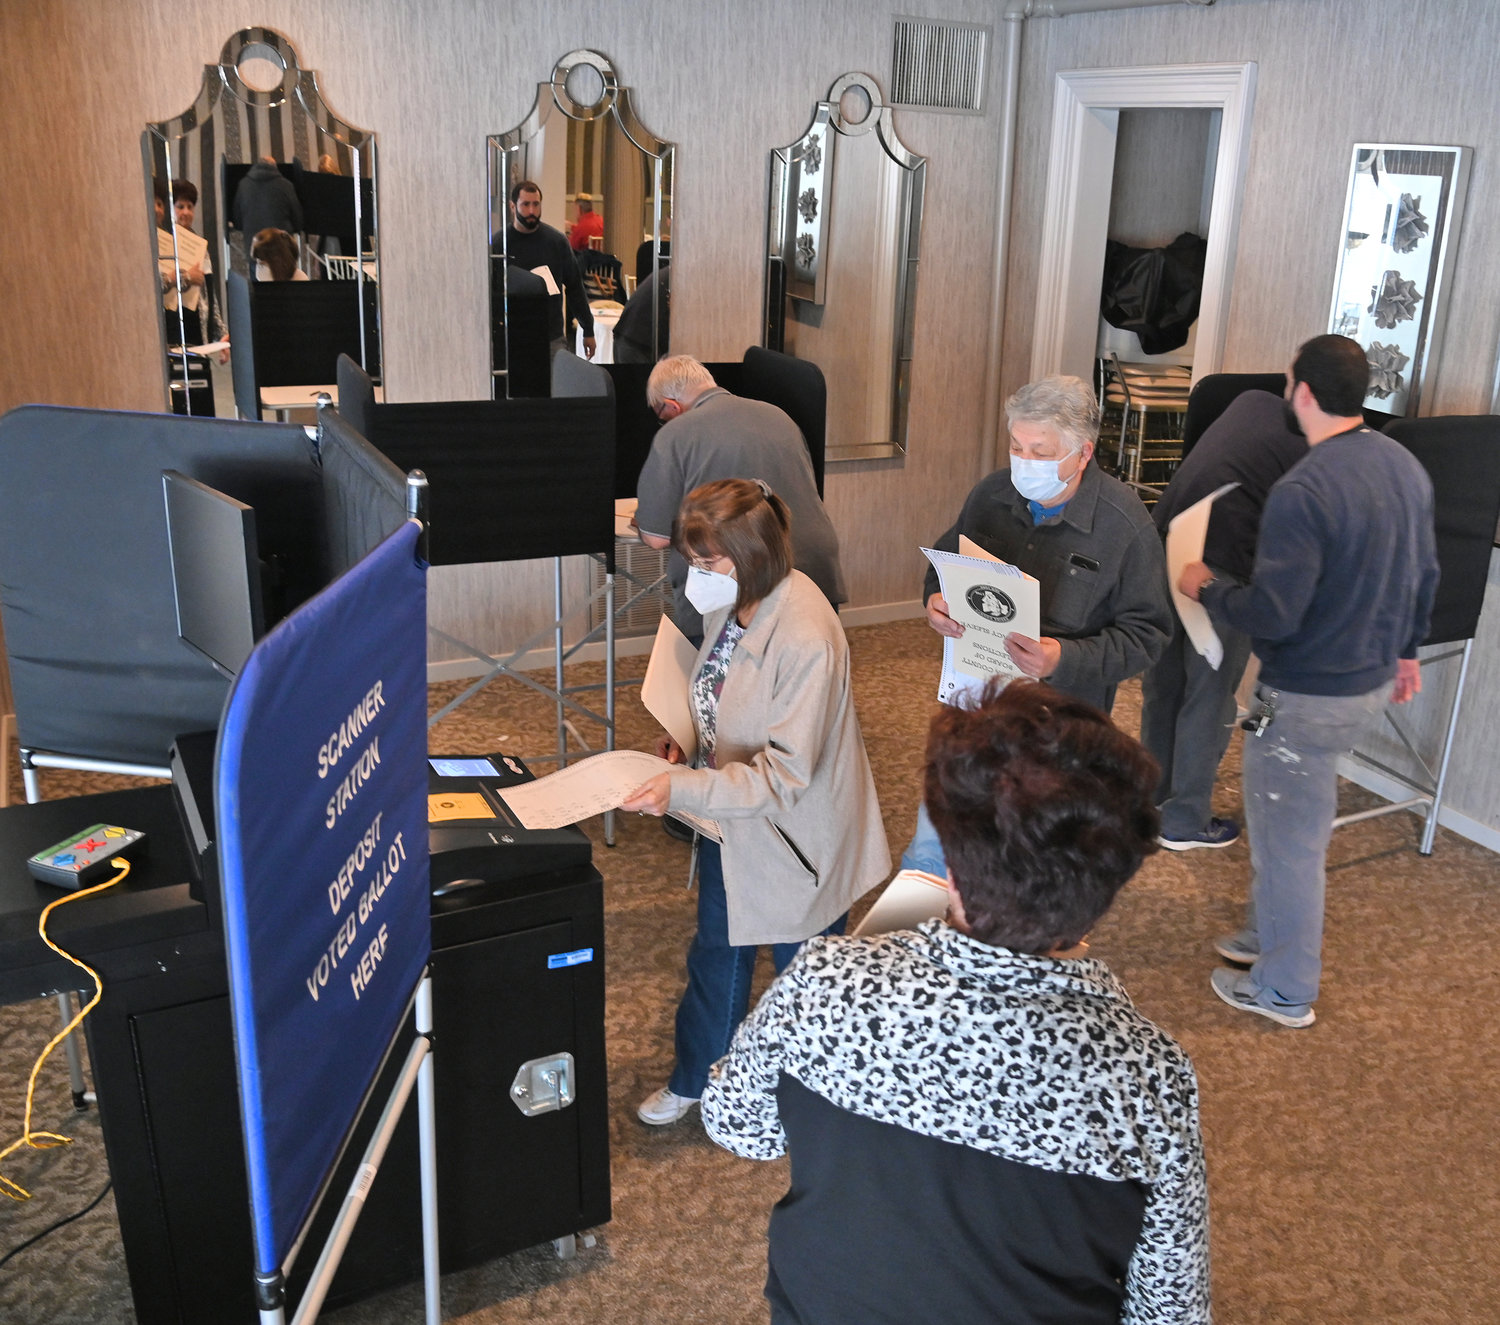 There was brisk voting Tuesday at Hart's Hill Inn in Whitesboro as well as at polling stations across the region. Oneida County election commissioners reported a busy day at the polls, with some 4,500 to 4,700 voters each hour going to cast their ballots across the county during peak times.